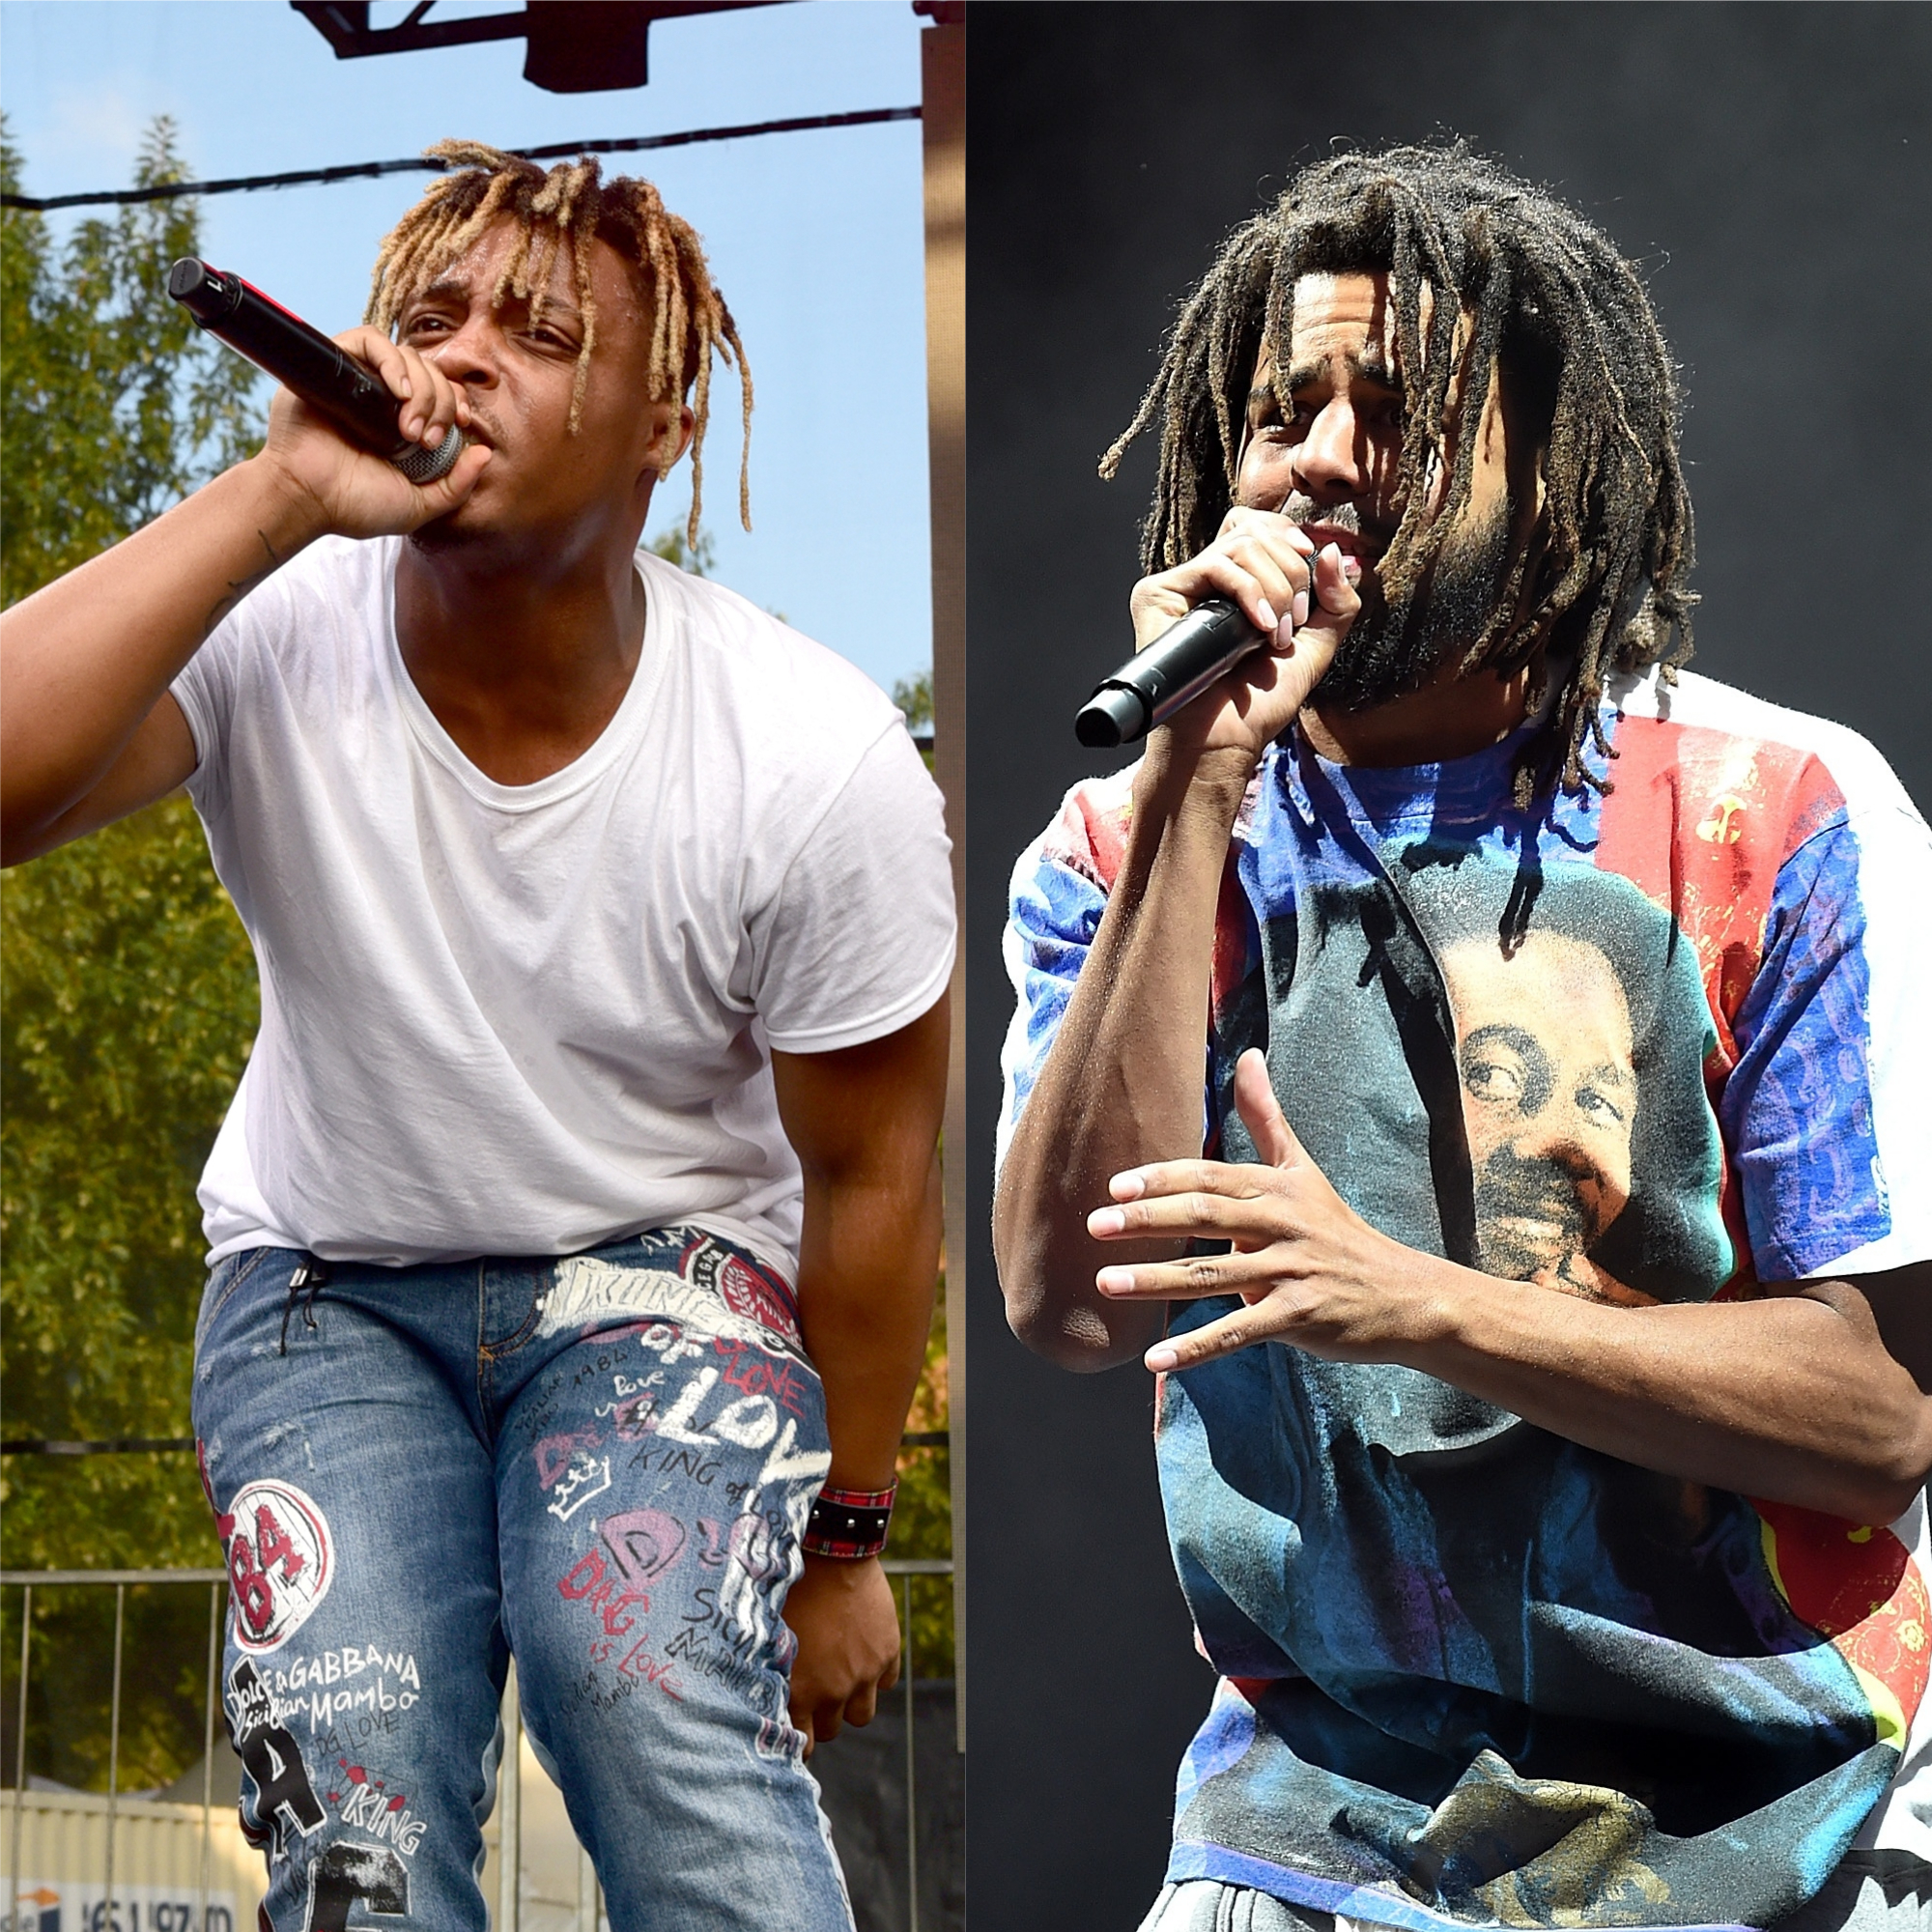 Is There A Juice WRLD & J. Cole Song Coming Soon?